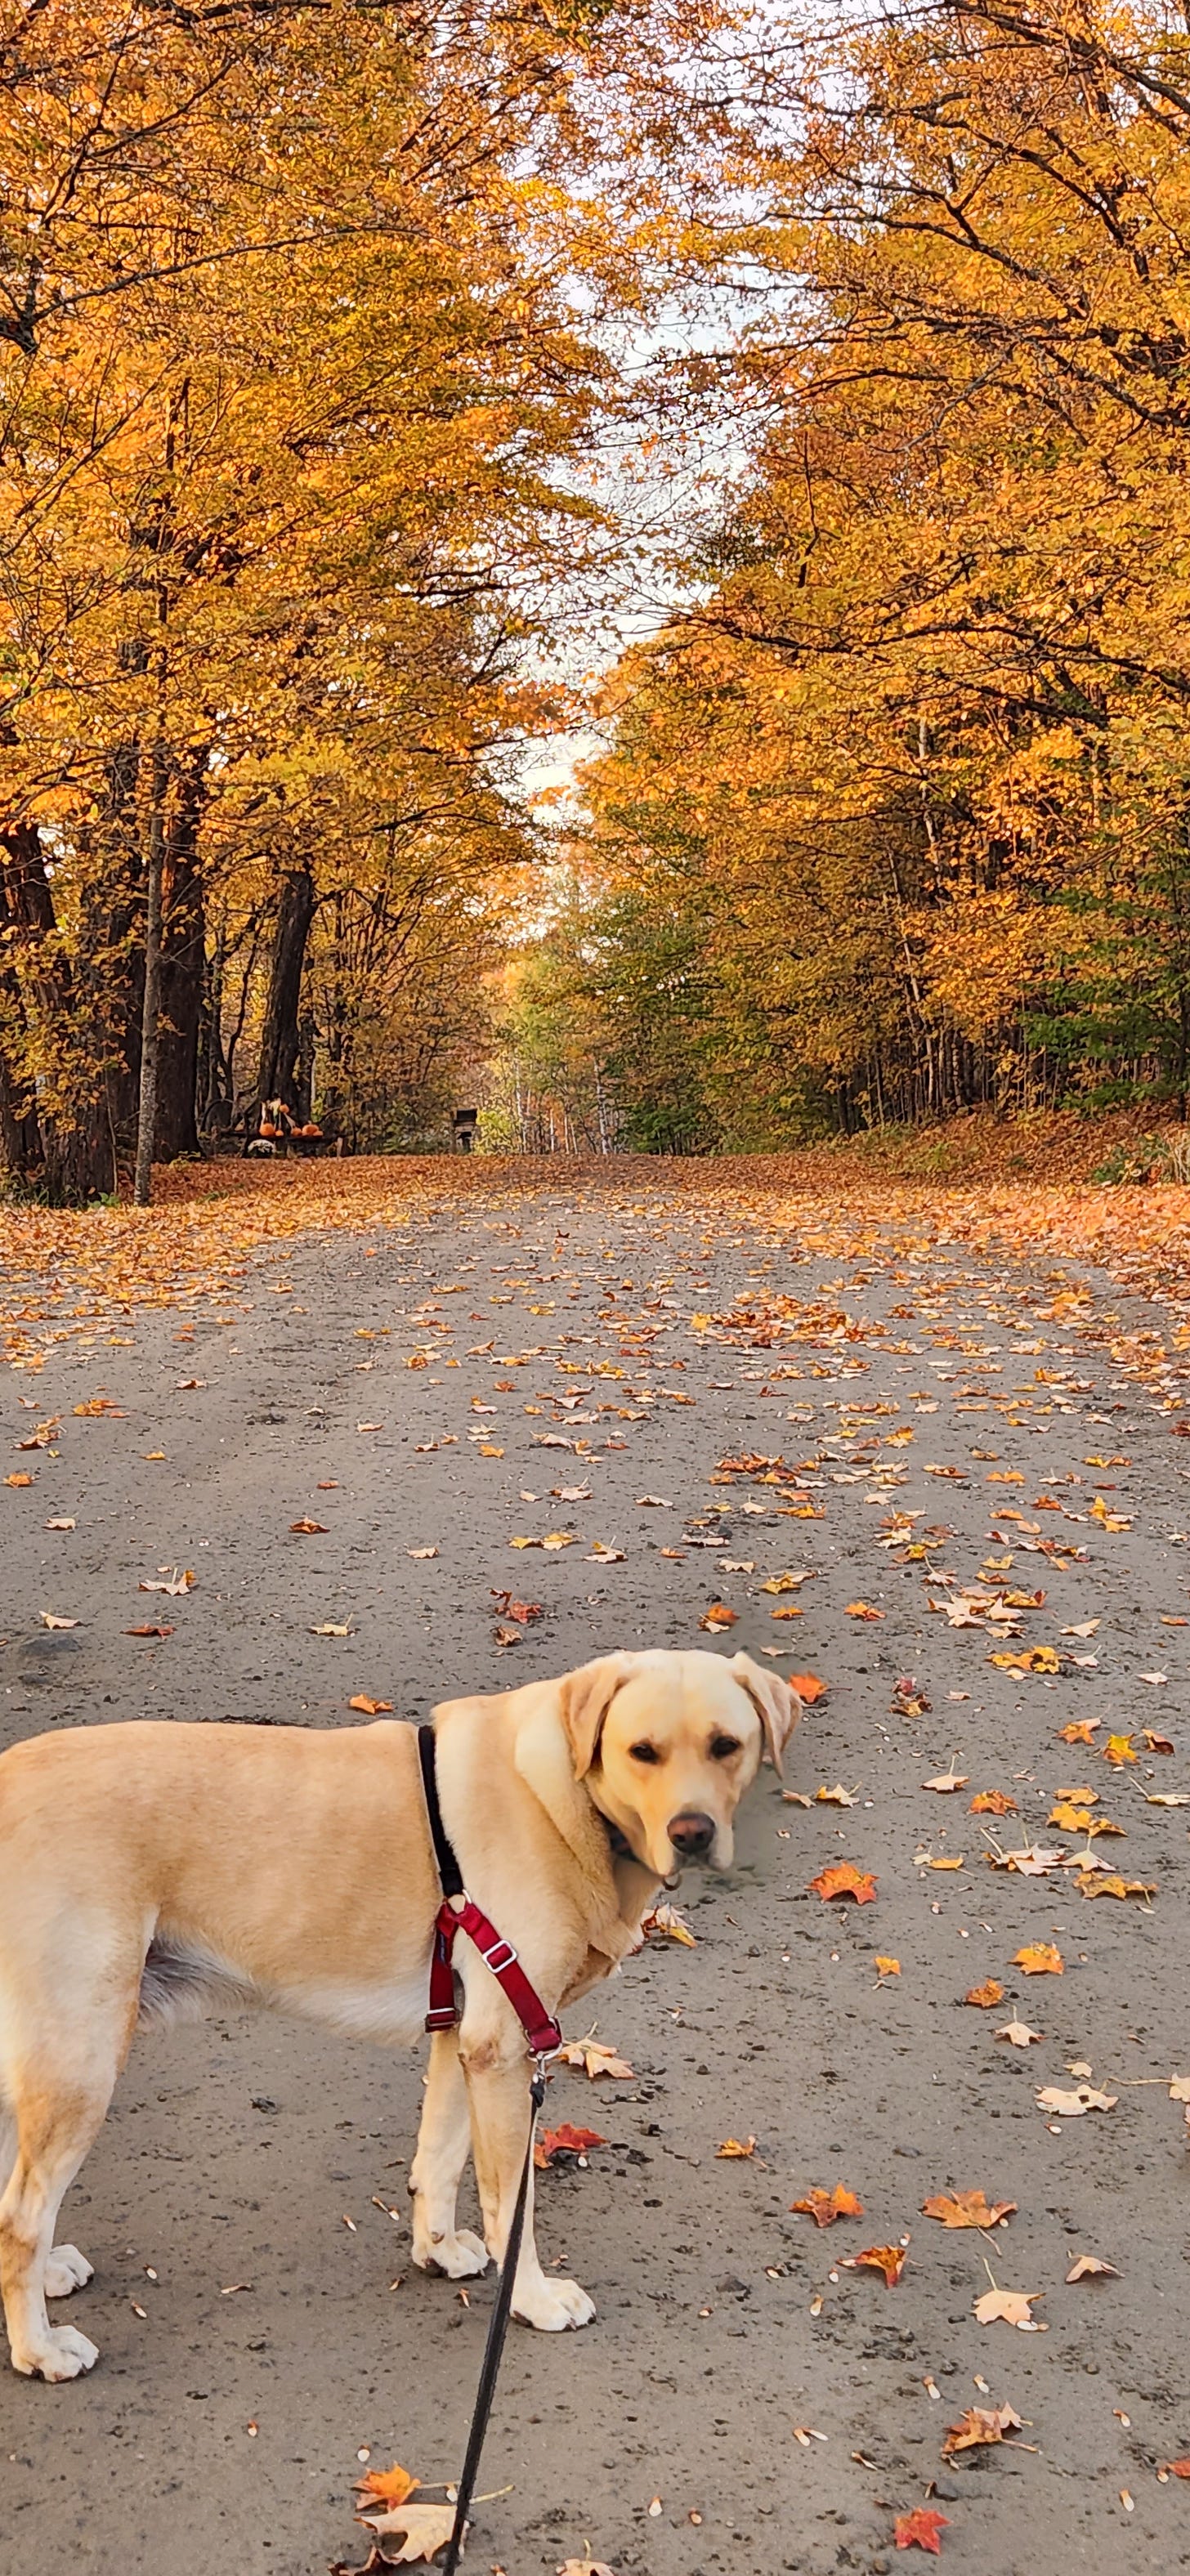 Yellow Labrador Retriever stands on a dirt road framed by maple trees turning gold in Vermont fall